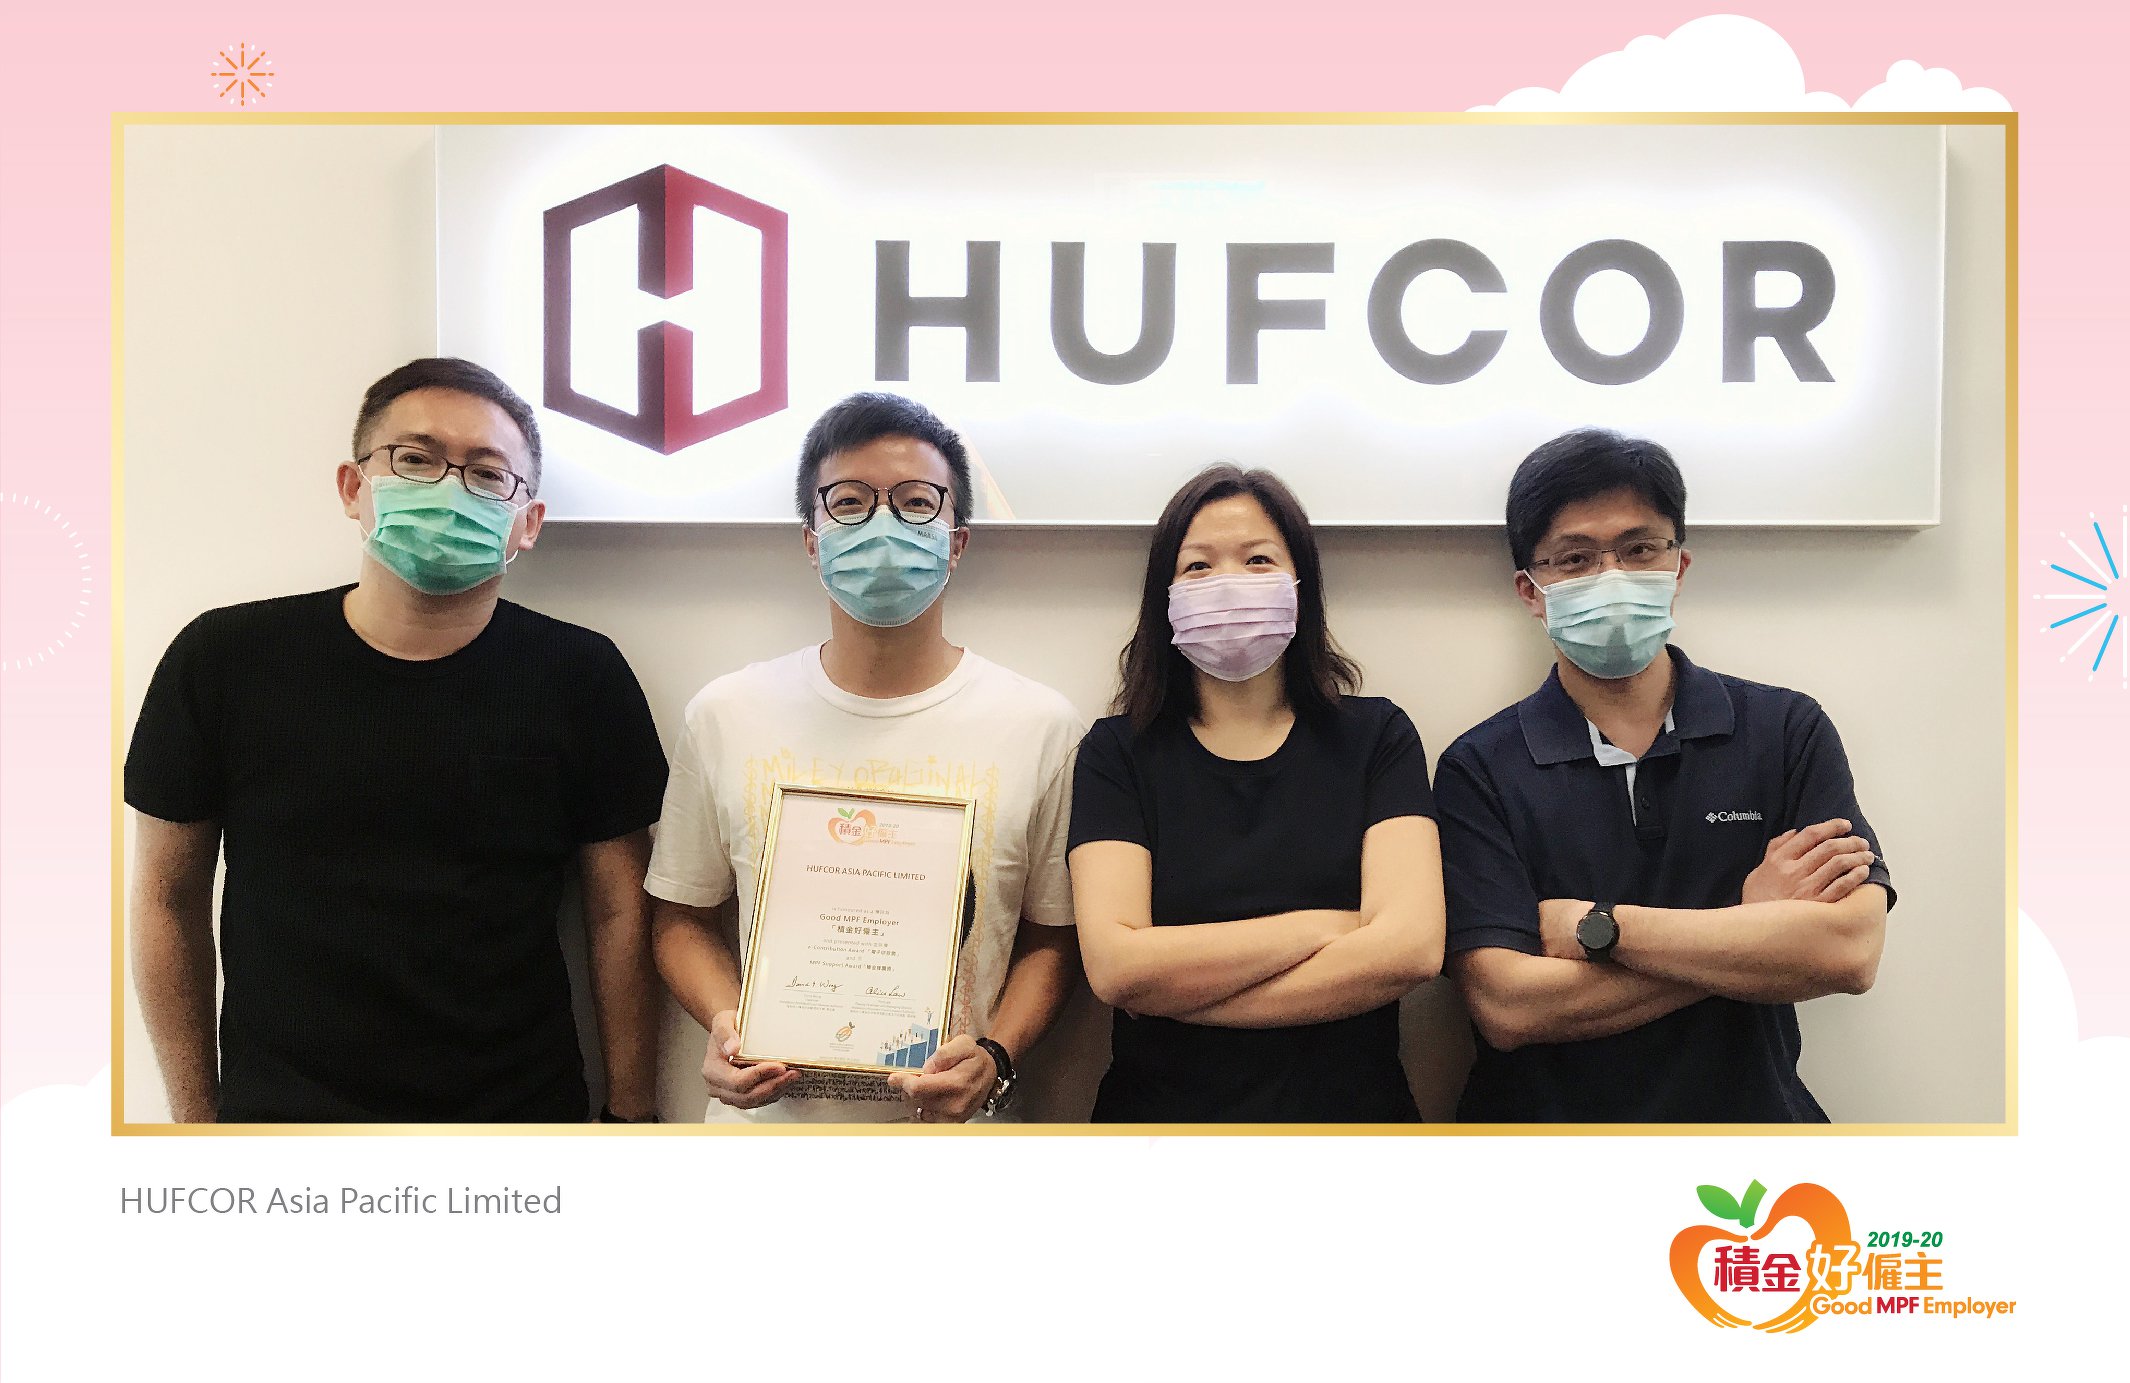 HUFCOR Asia Pacific Limited